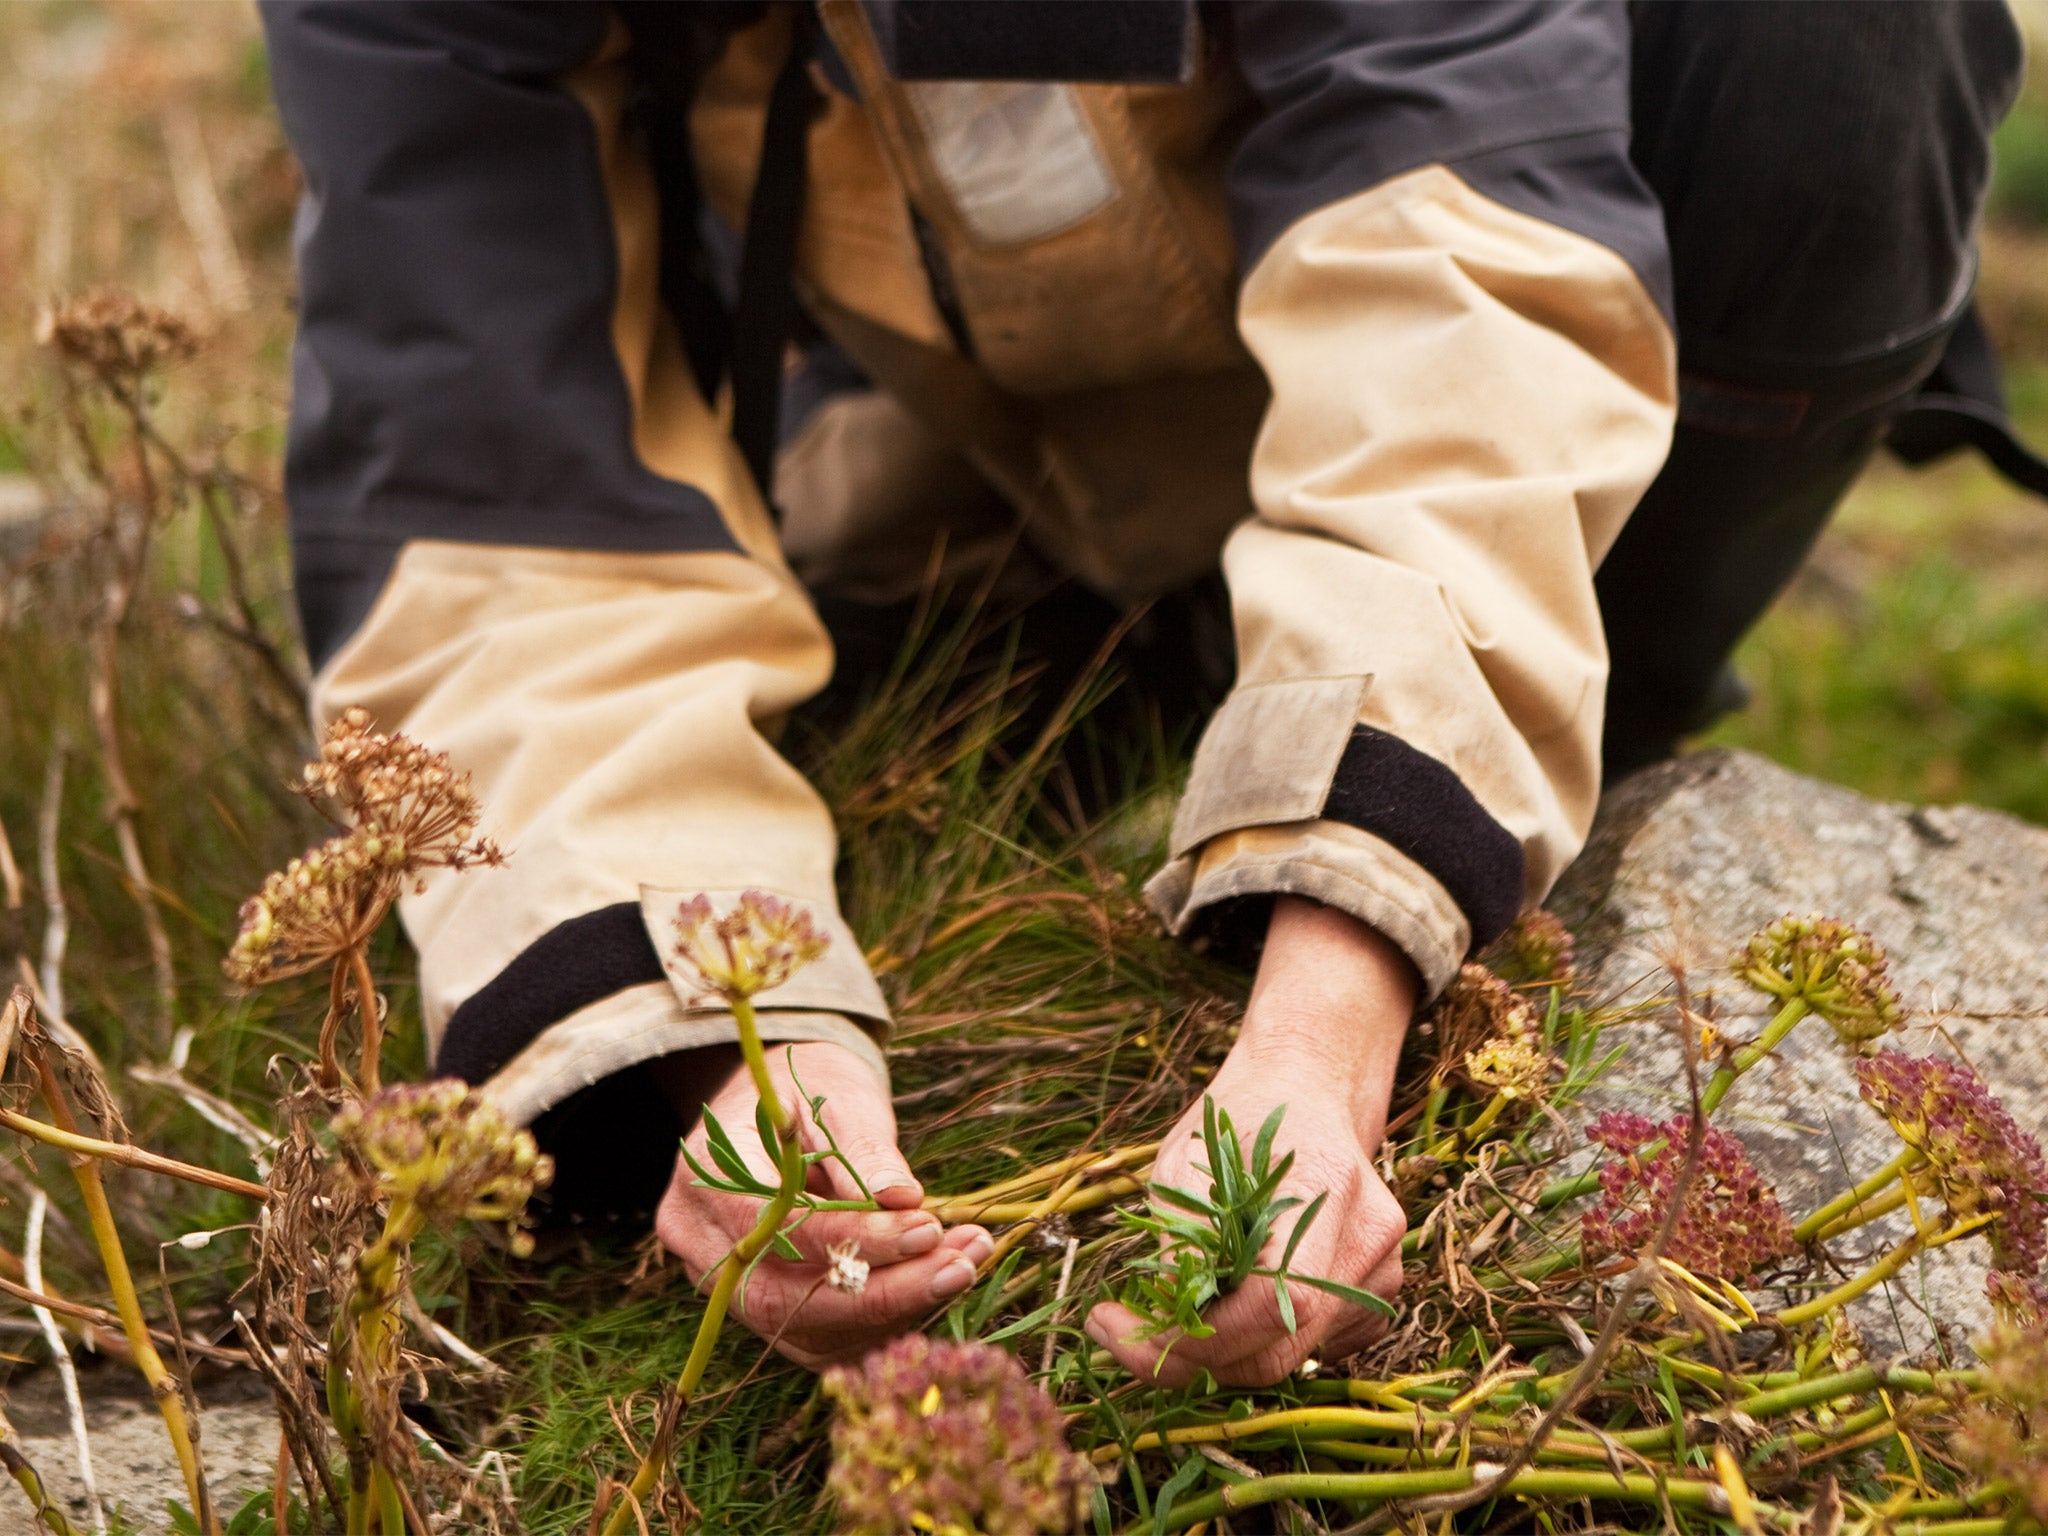 Foraging has been championed by a host of celebrity chefs